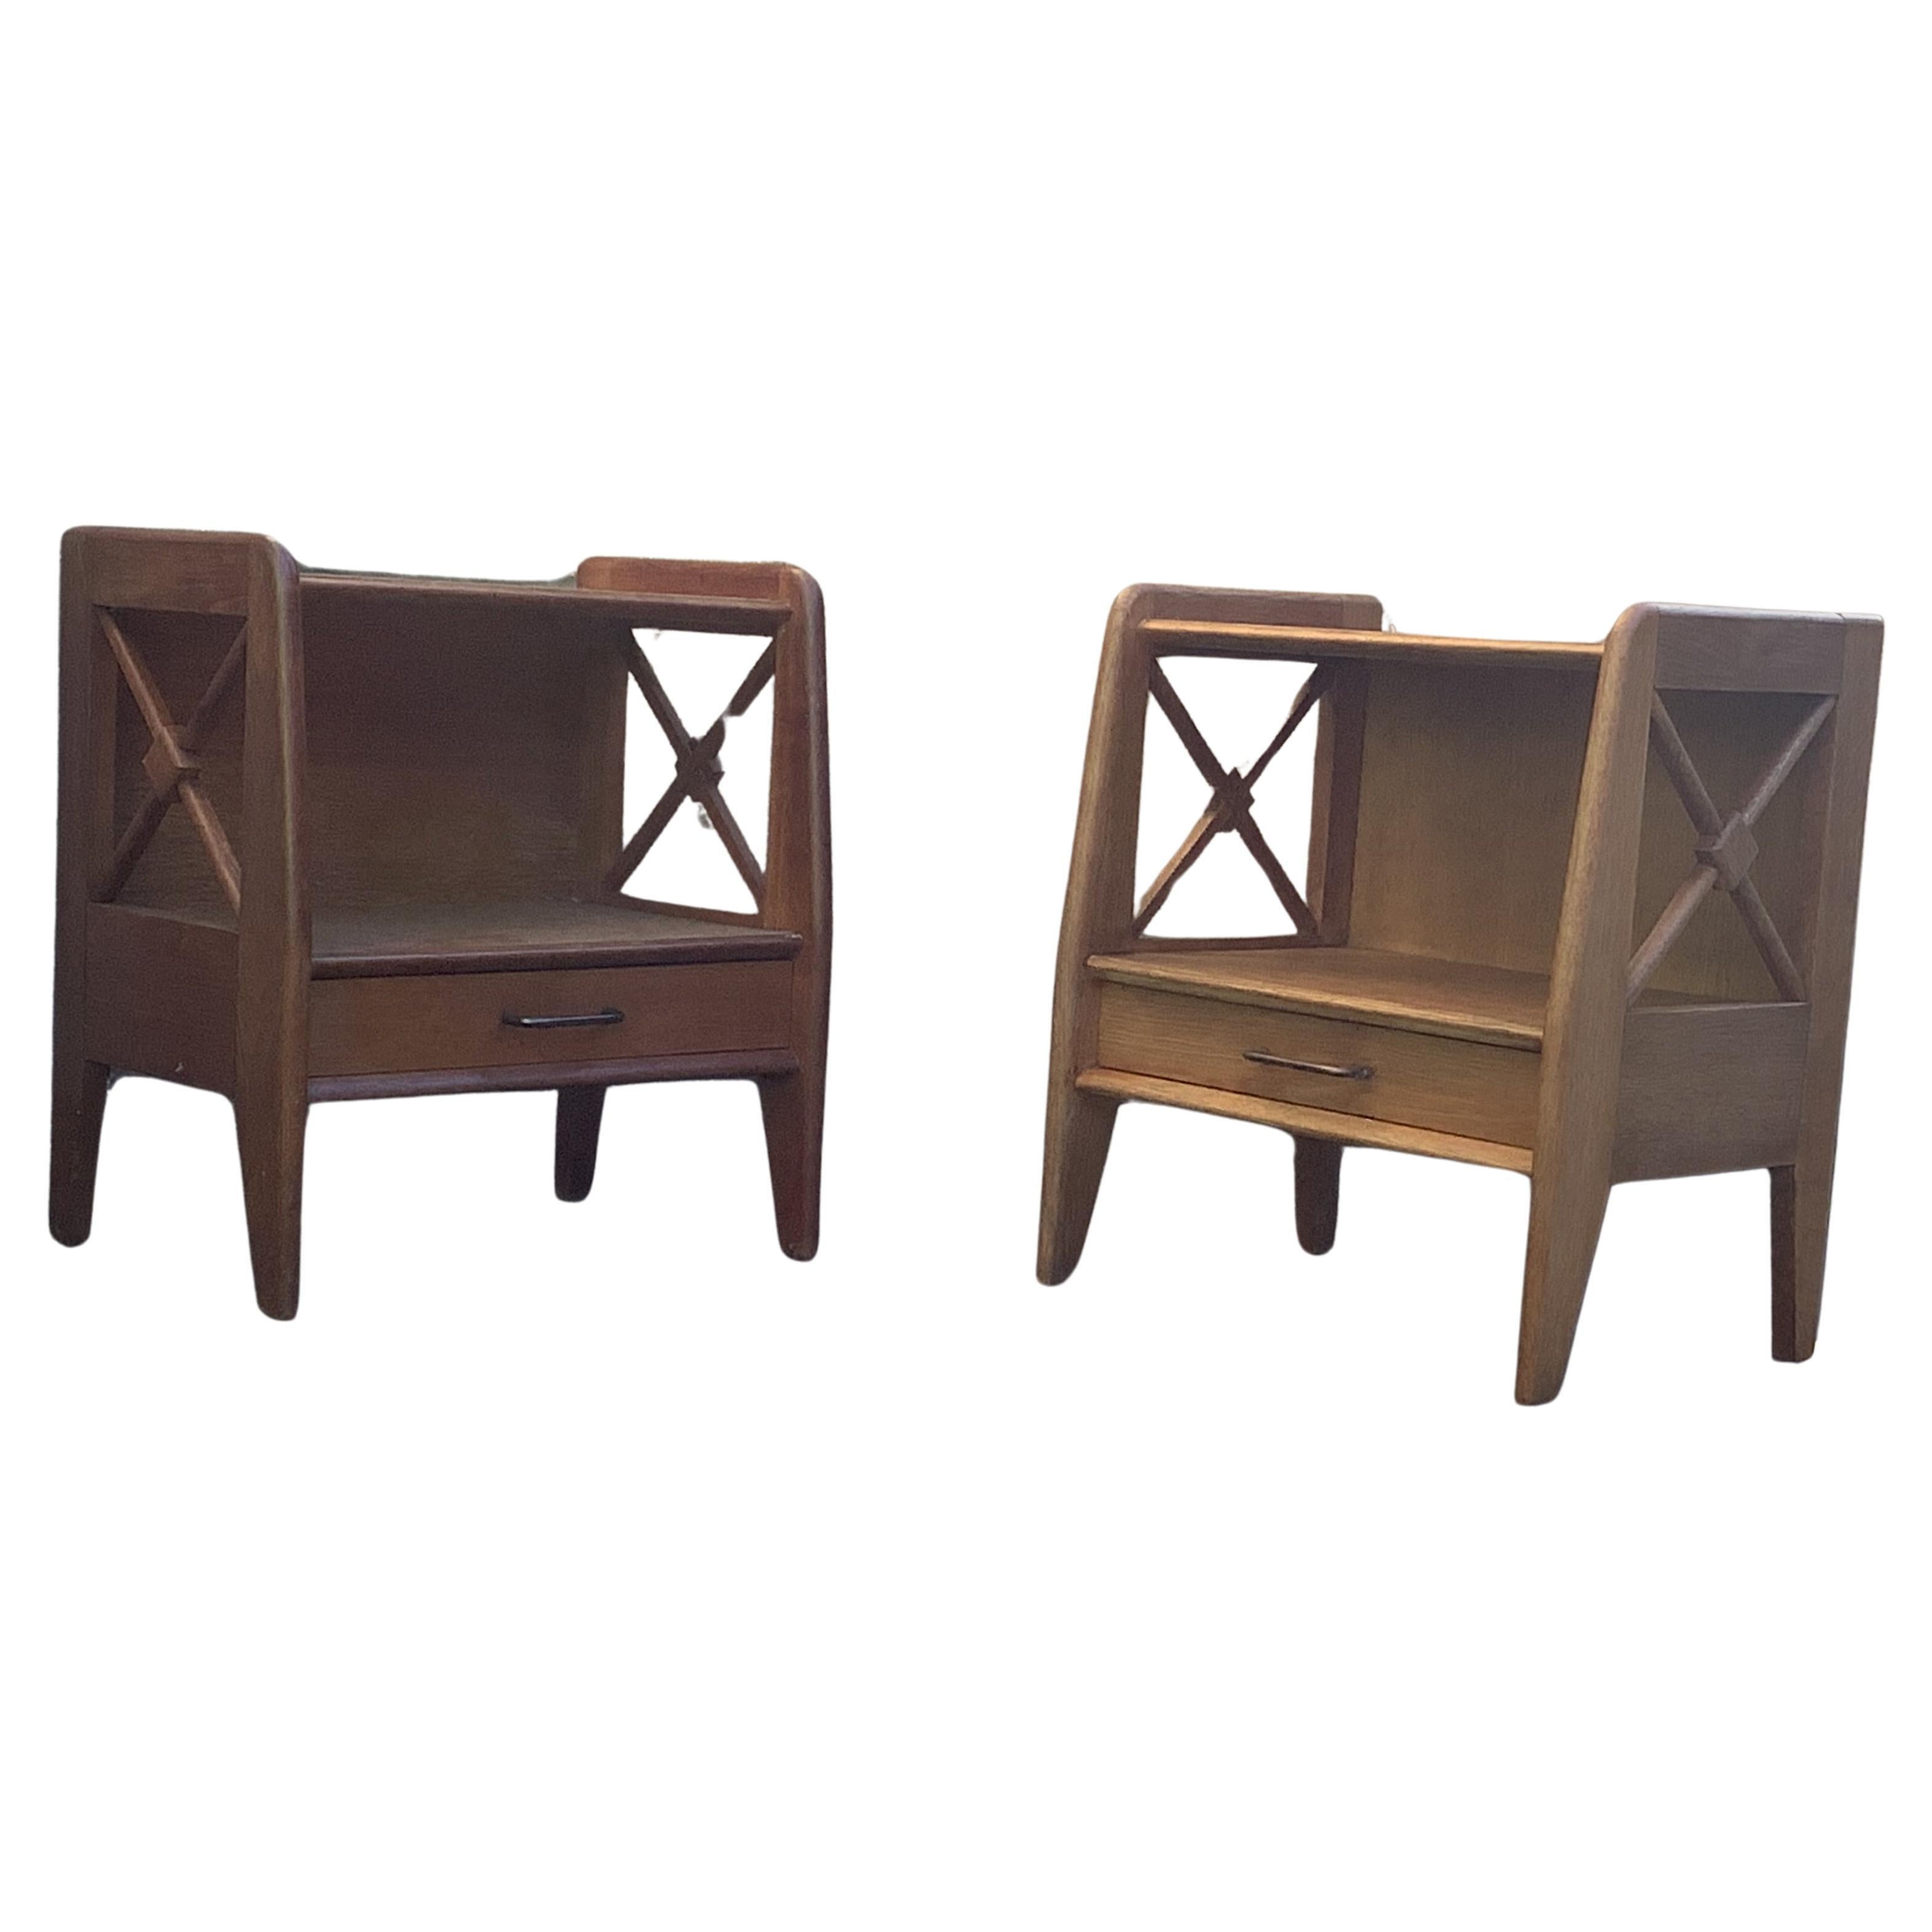 pair of 1950's oak bedside tables by Jacques Adnet For Sale